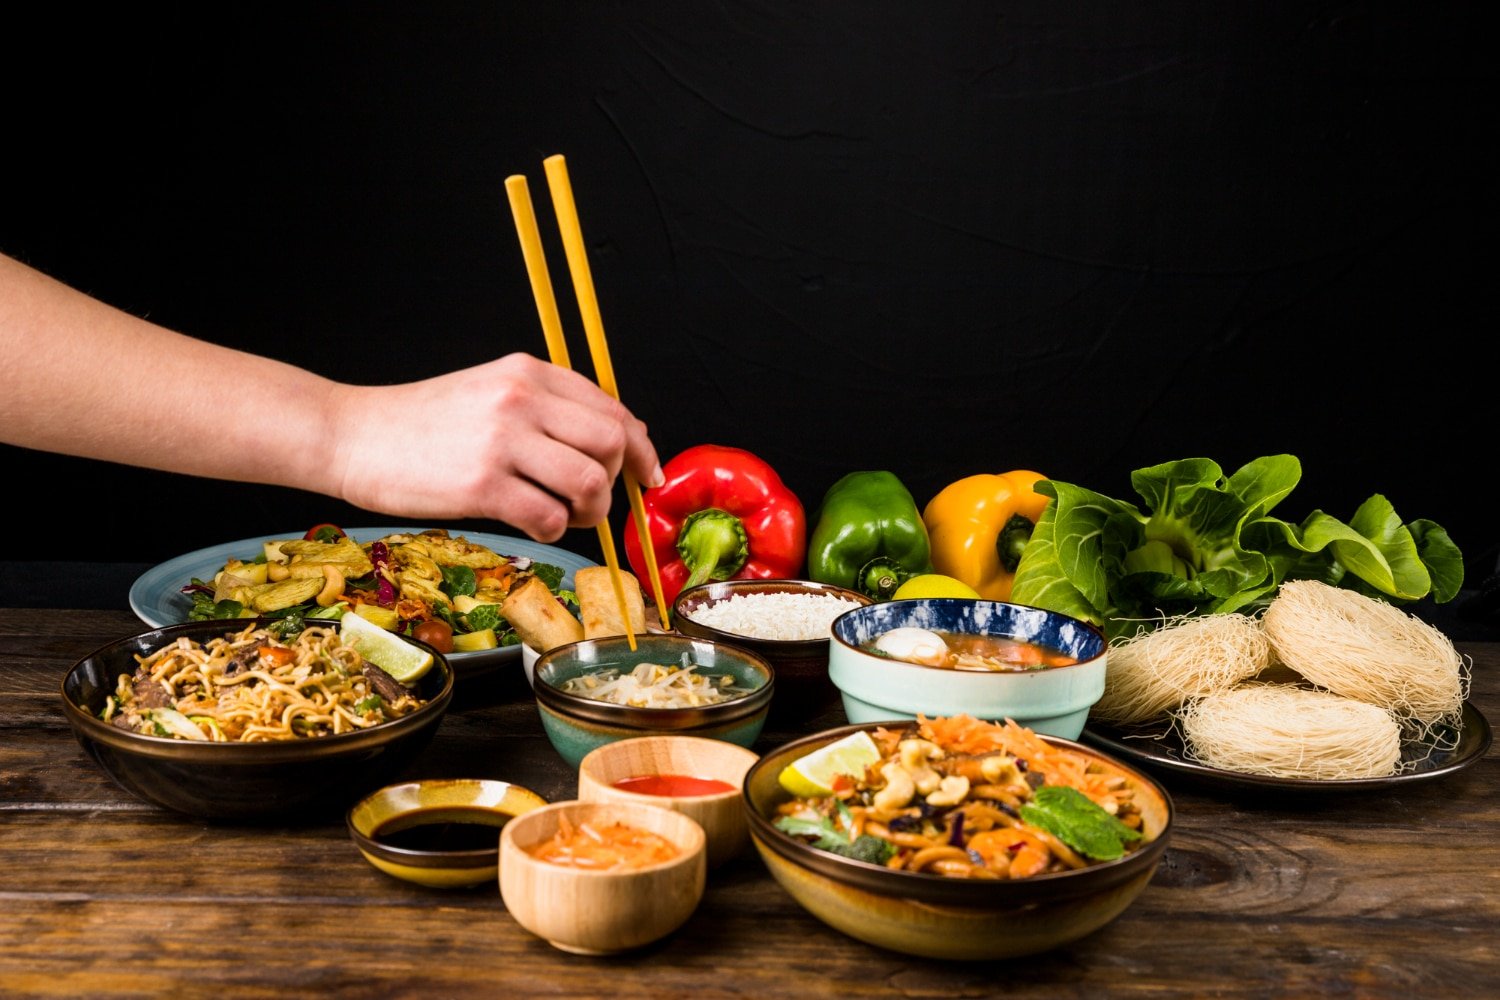 Explore Authentic Asian Flavors With Omsom’s Starter Kits